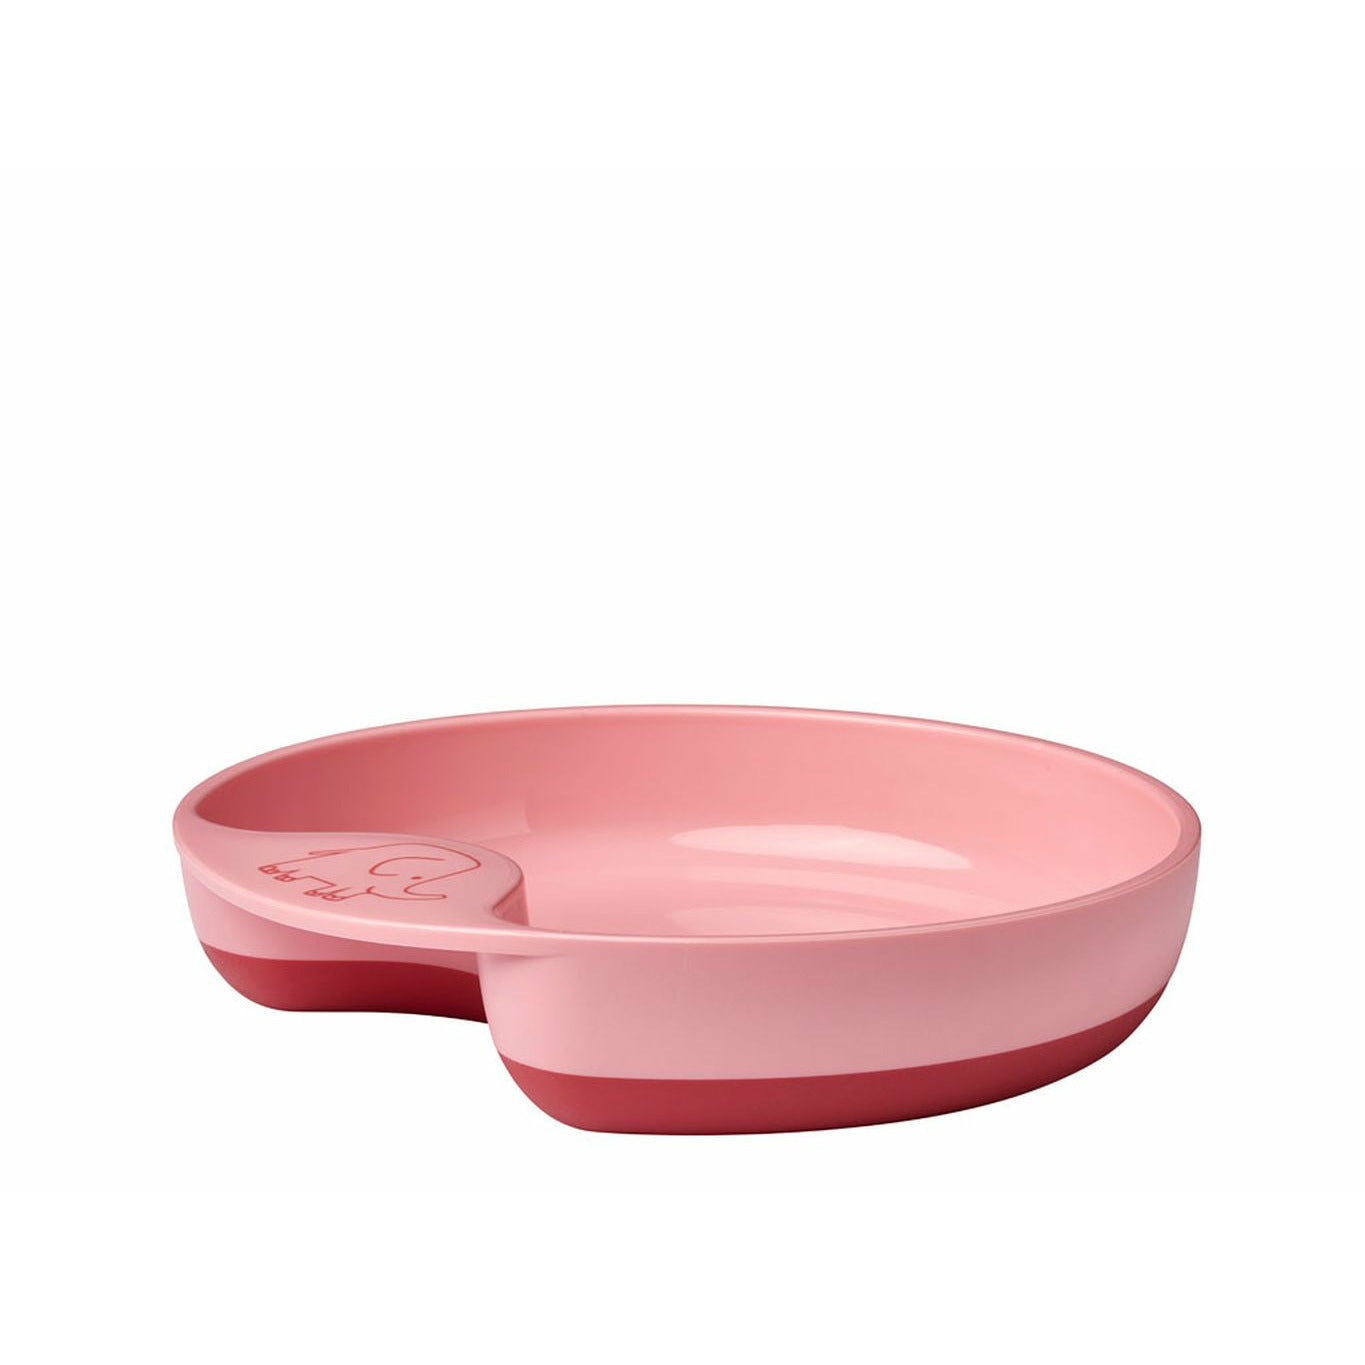 Mepal Mio Learning Plate, Pink